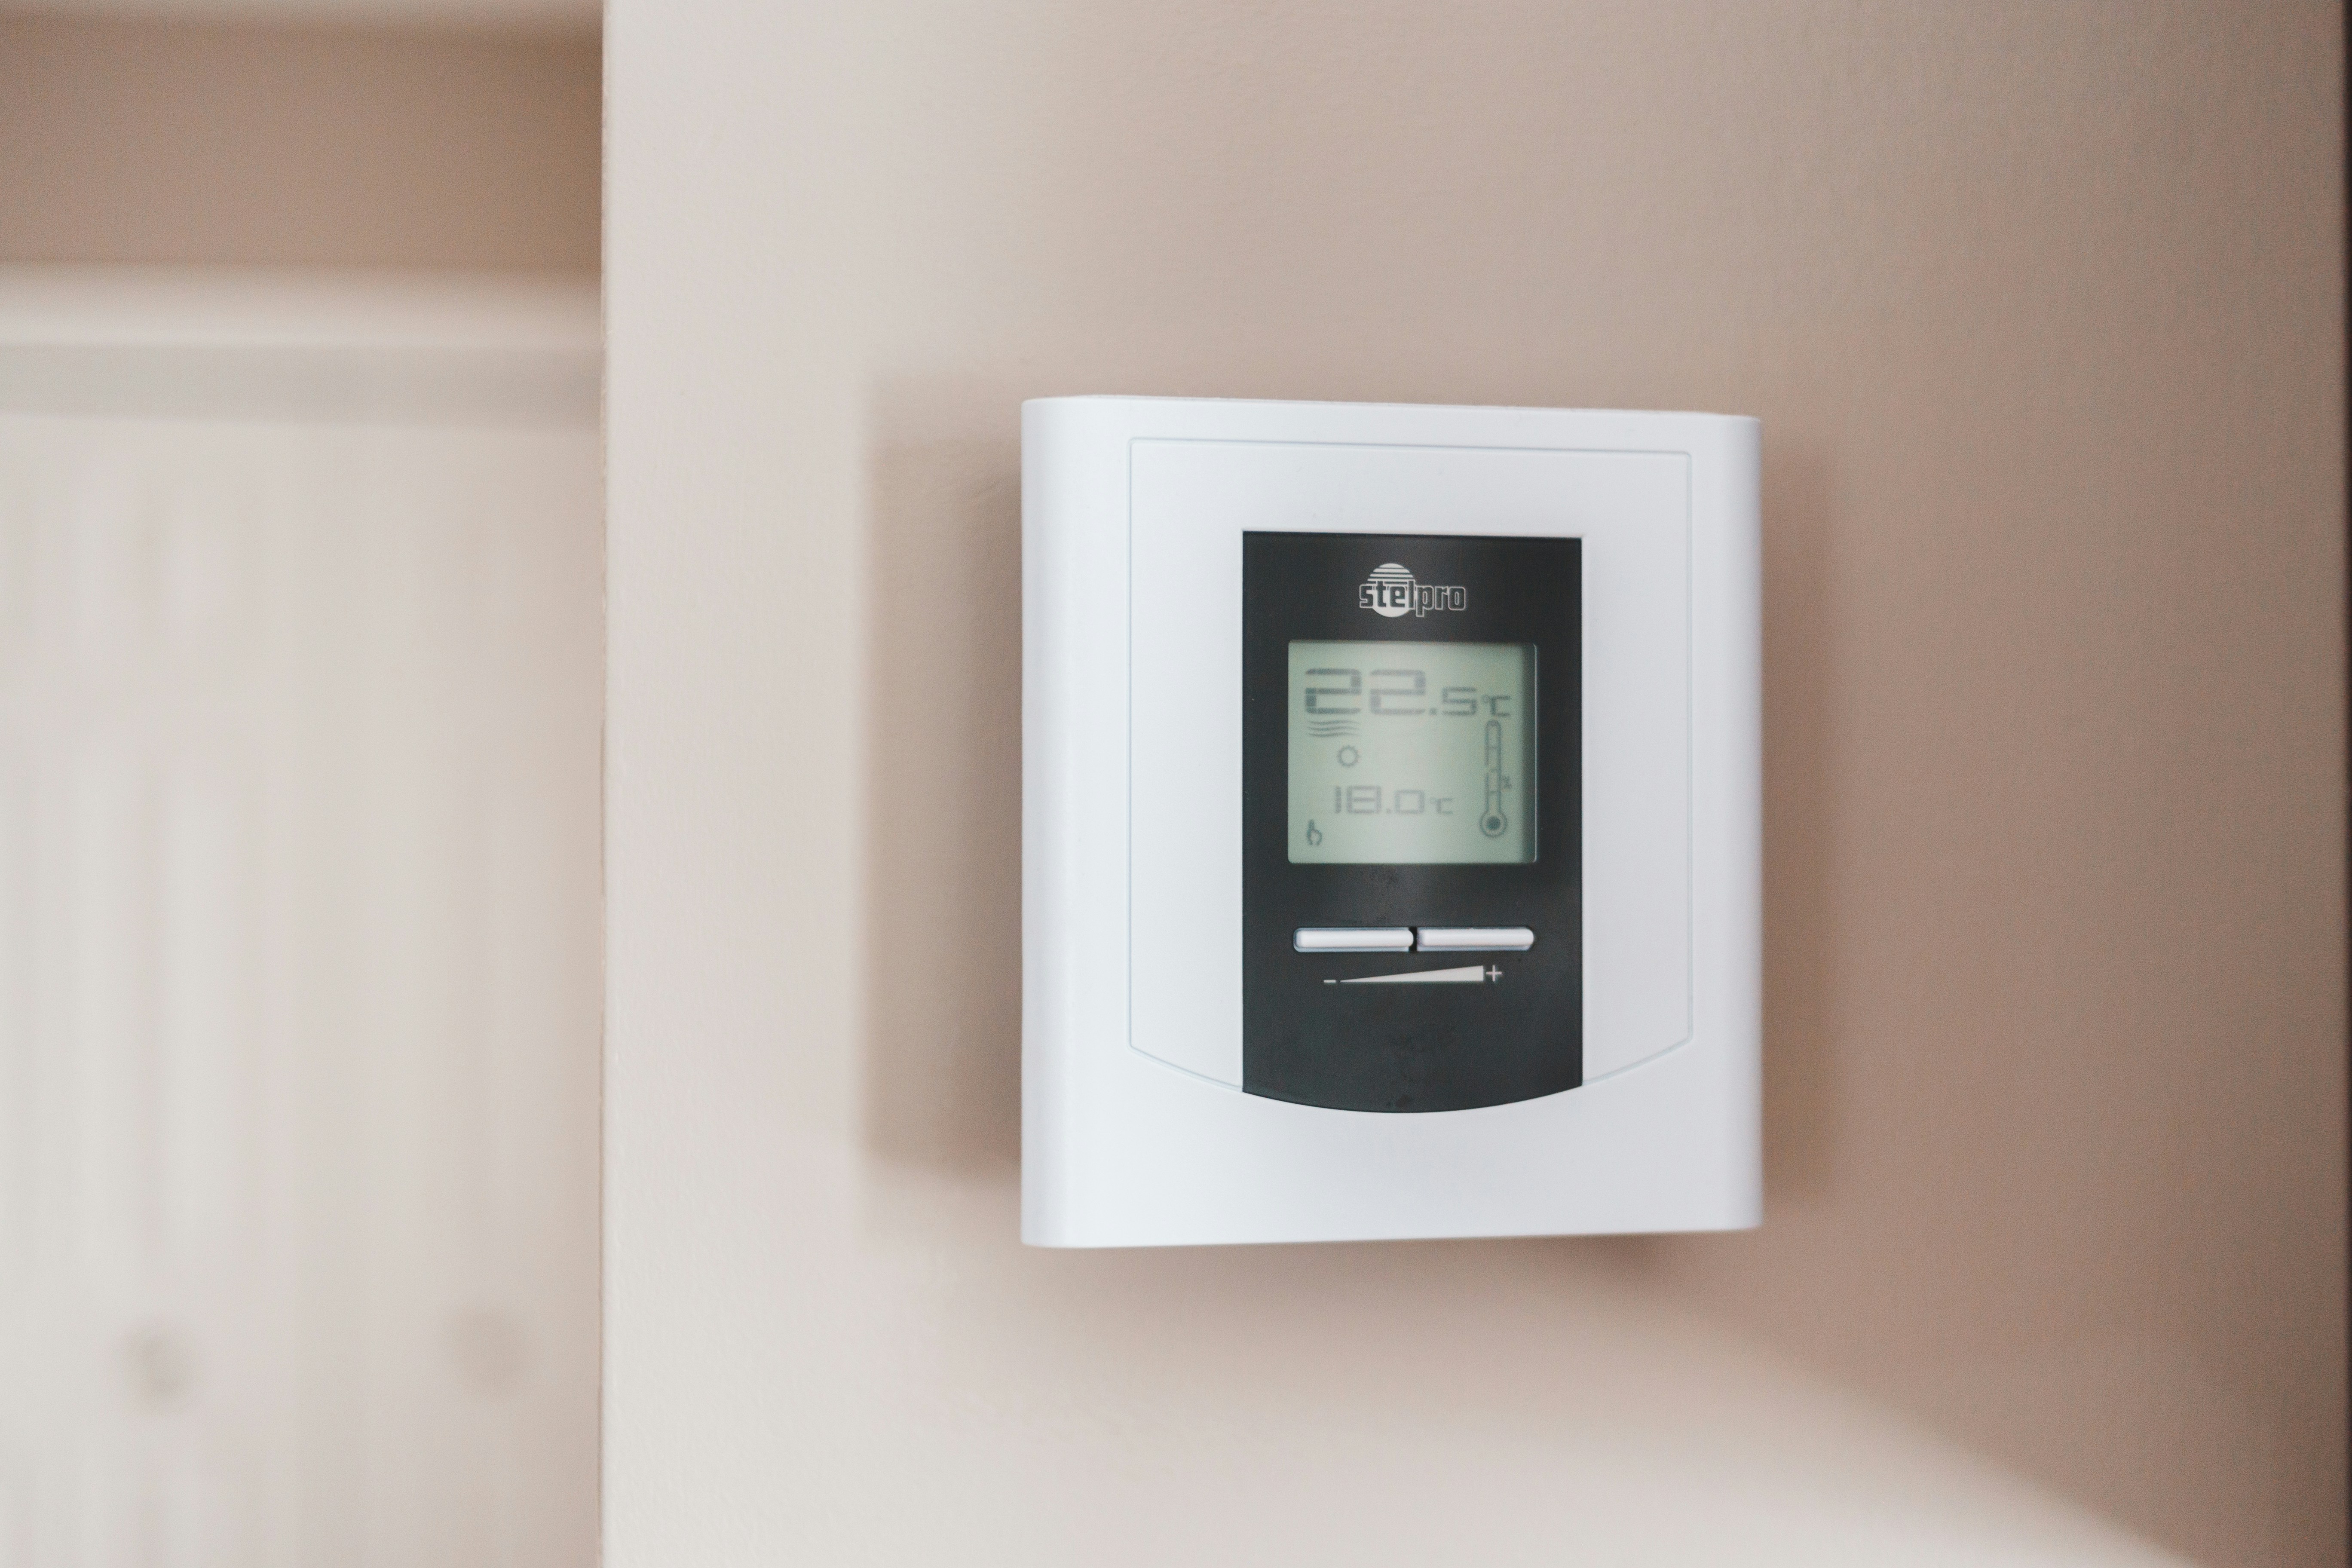 Programmable Thermostat Installation: A Simple and Effective Method to Save Energy